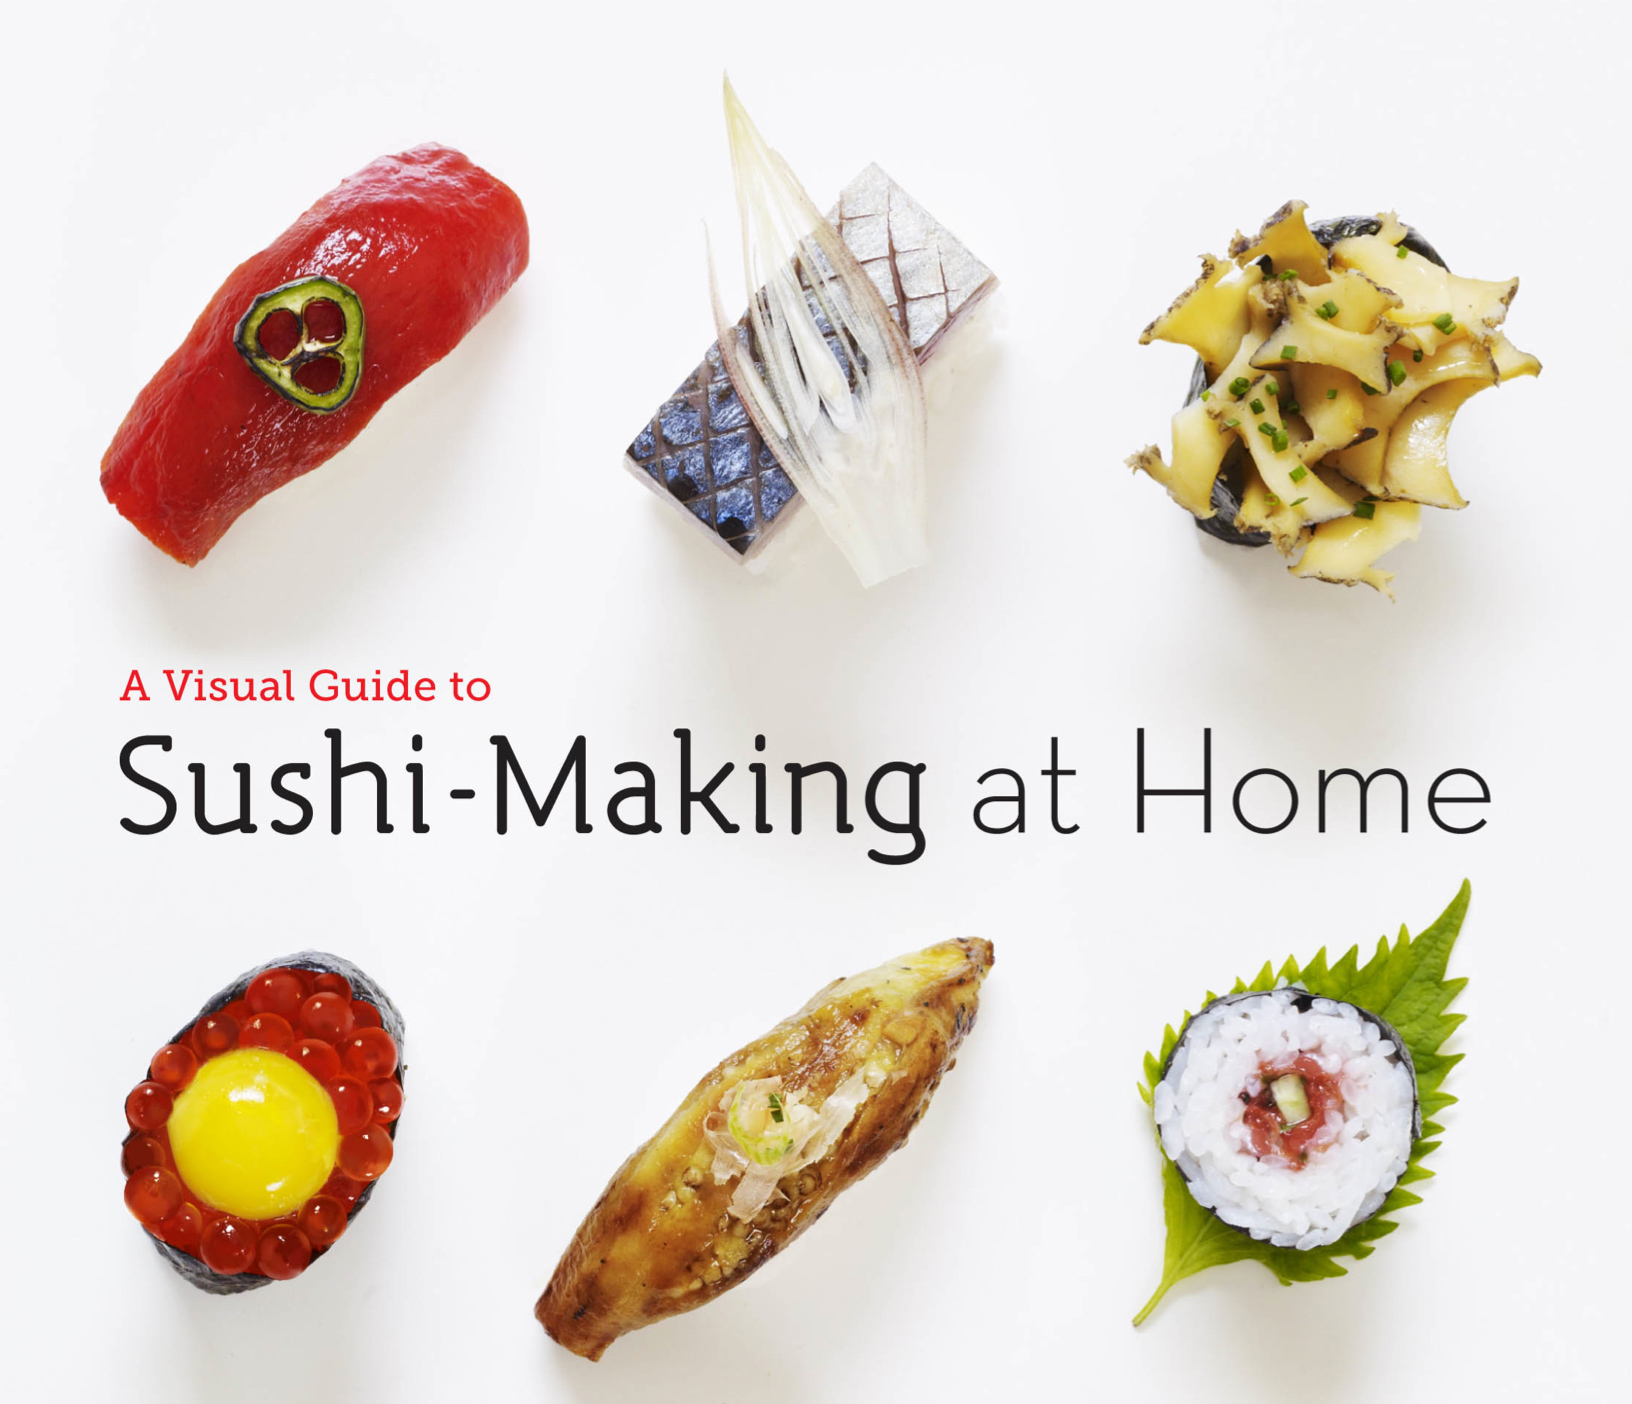 A visual guide to Sushi making at home